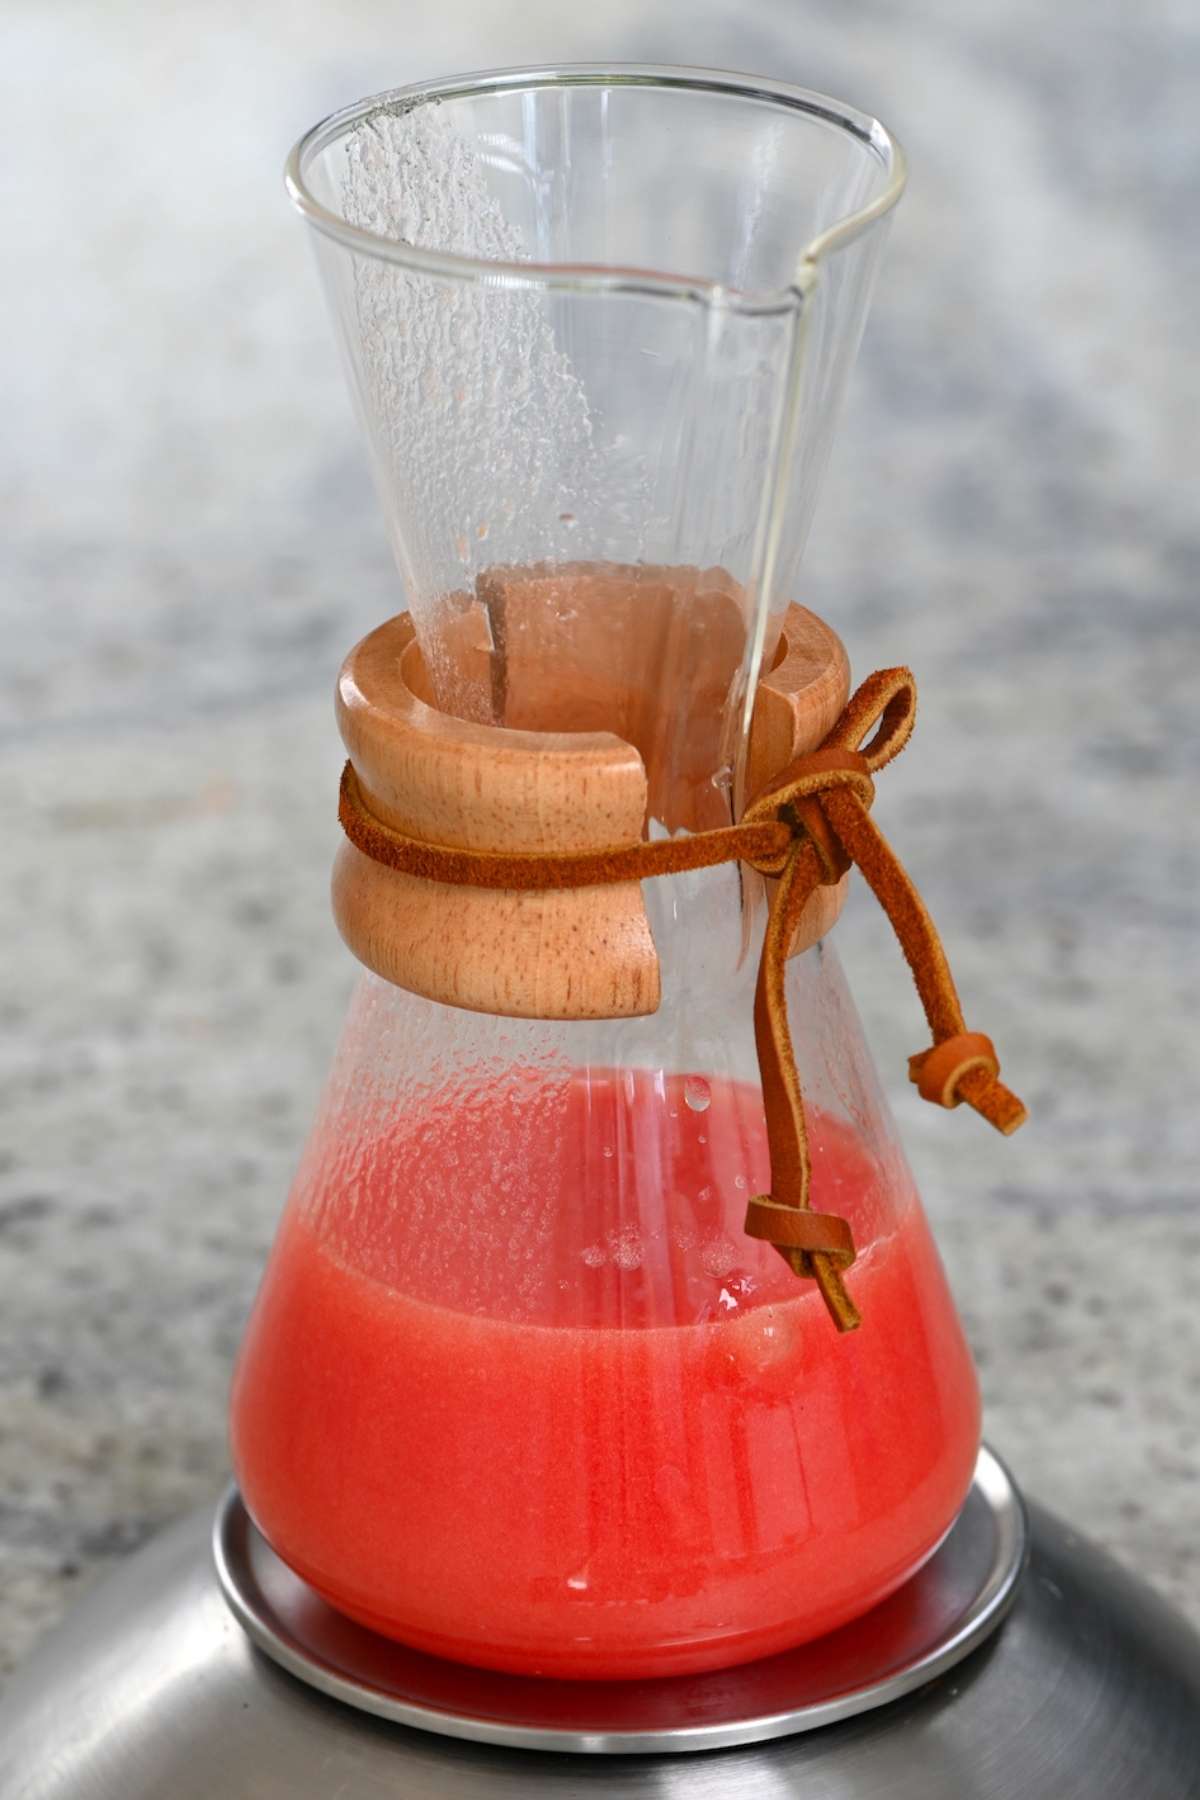 Tomato juice in a glass container